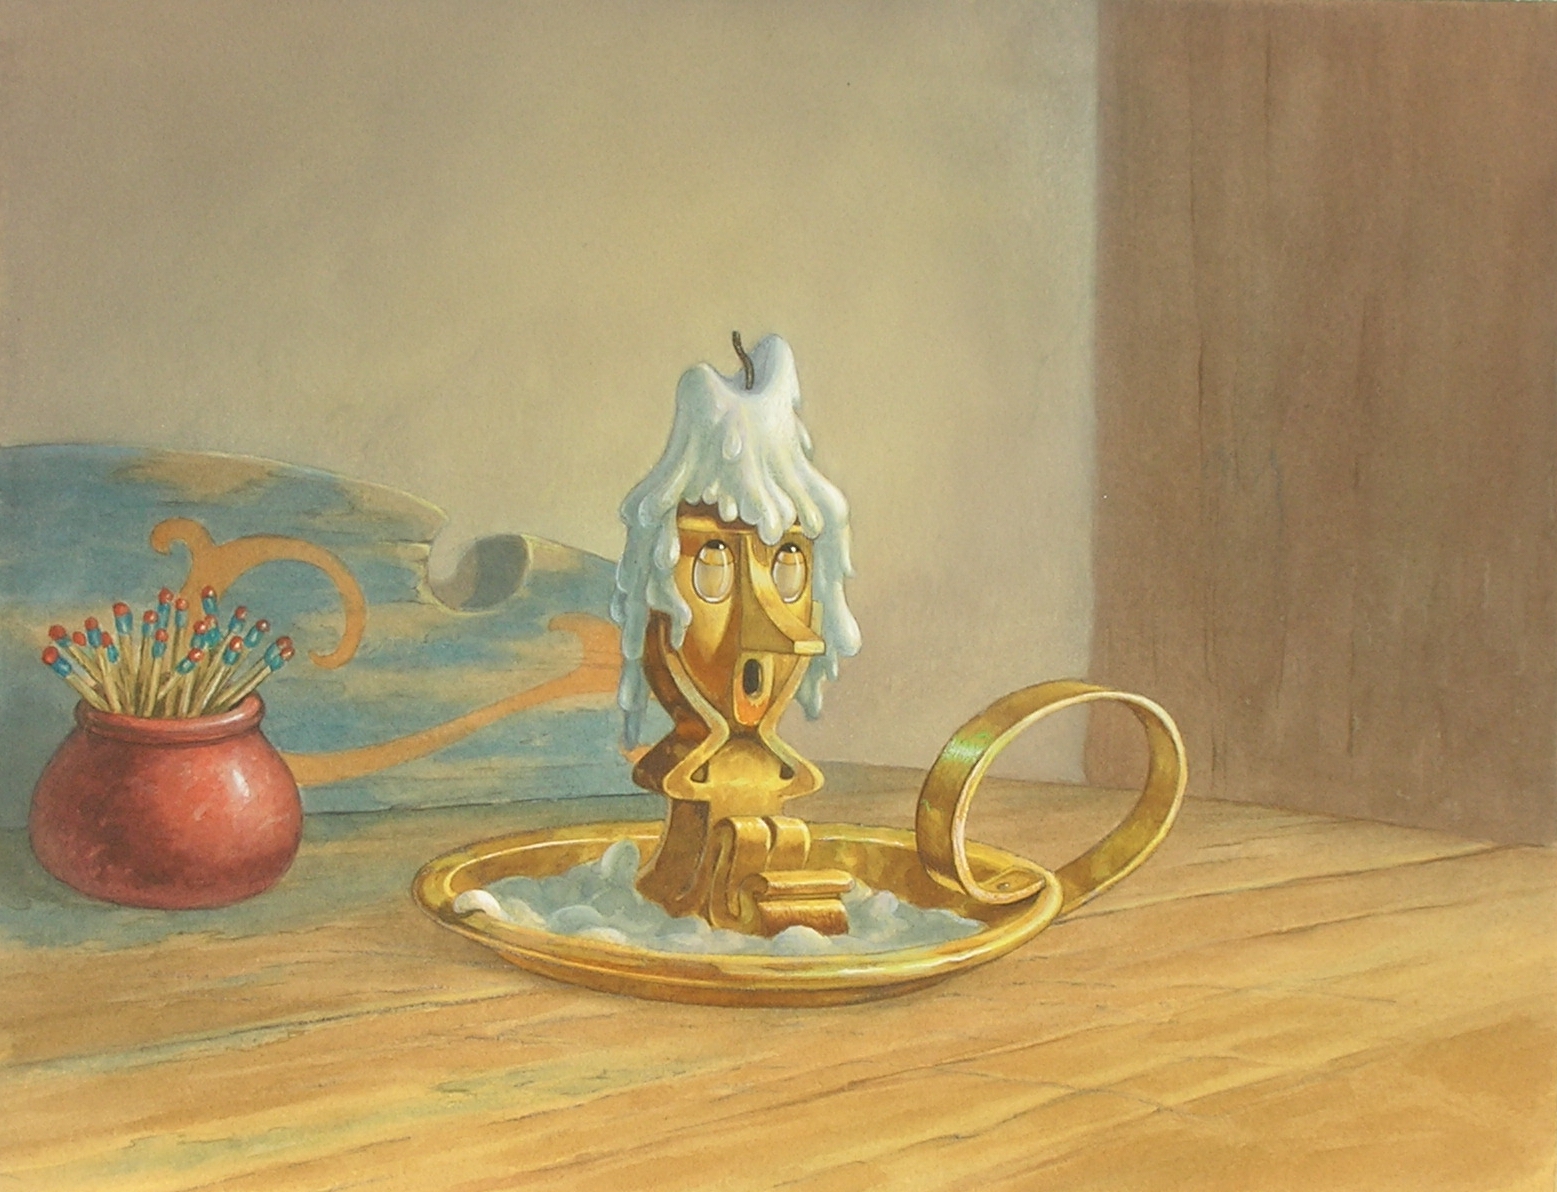 Background Painting of Gephetto's Candle Holder from Pinocchio, 1940, in C  E's Sold Art Comic Art Gallery Room